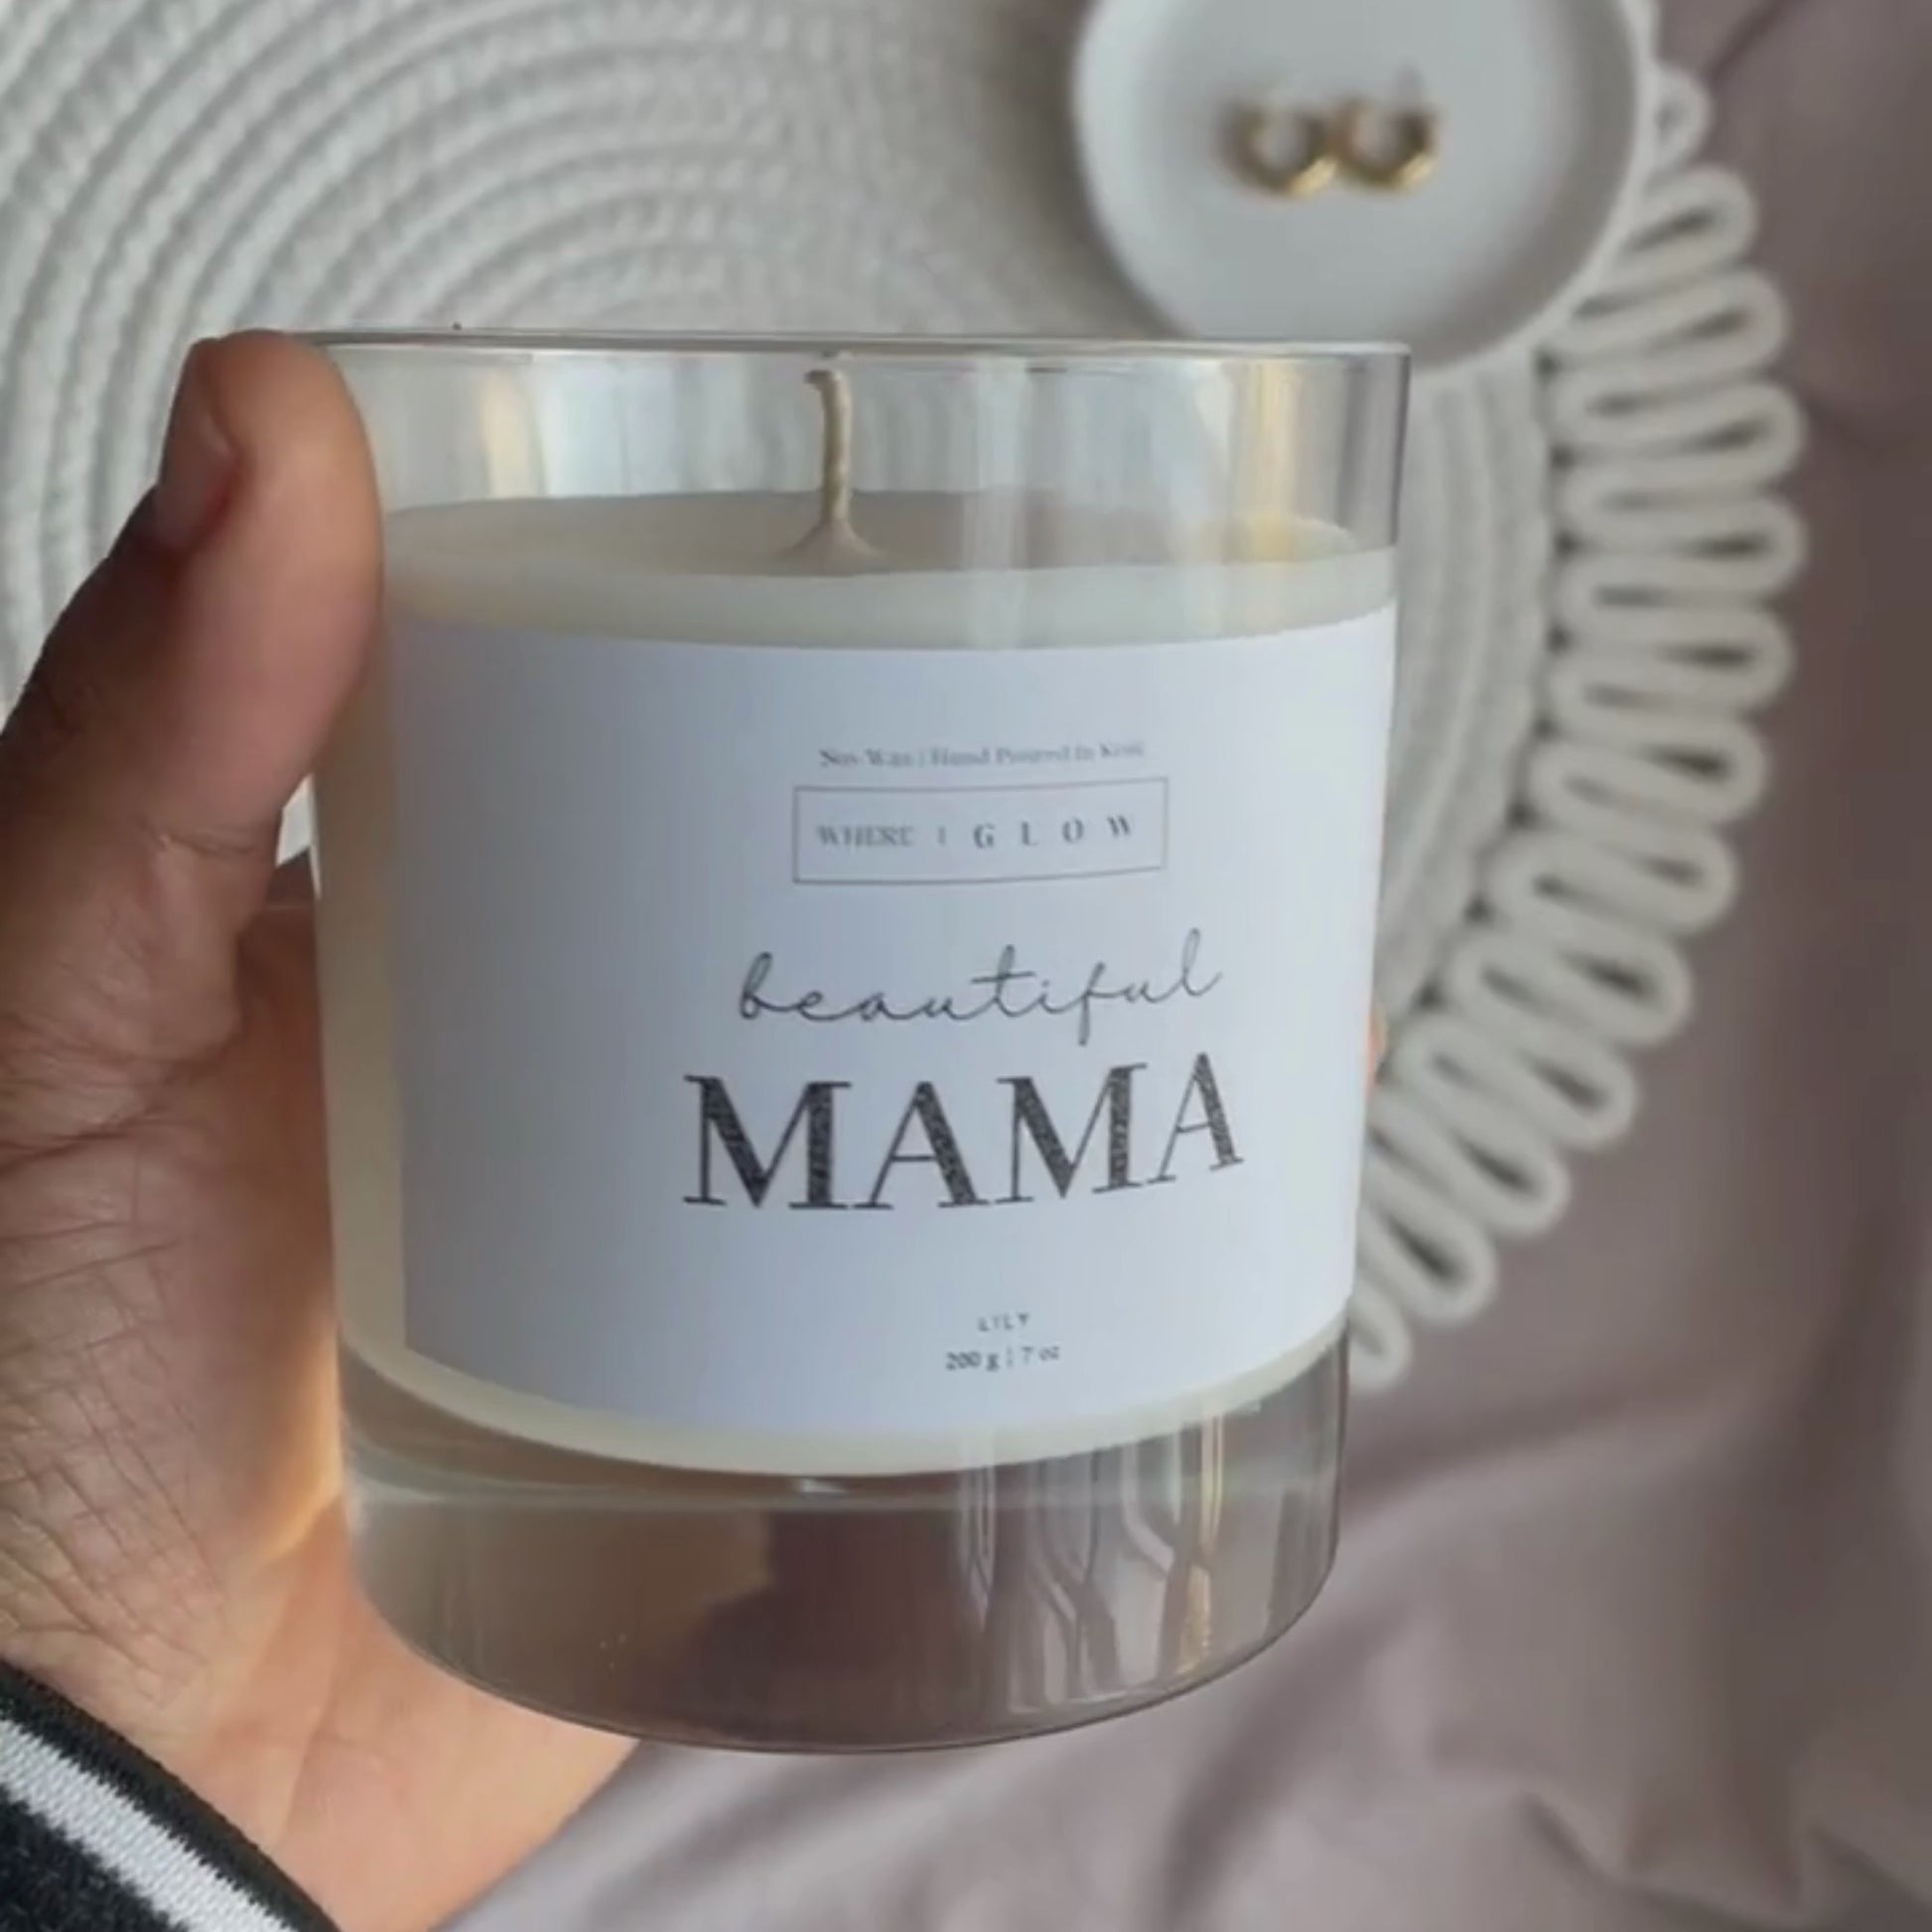 Vegan Mama Candle Scented Soy Candle Gift by Where I Glow